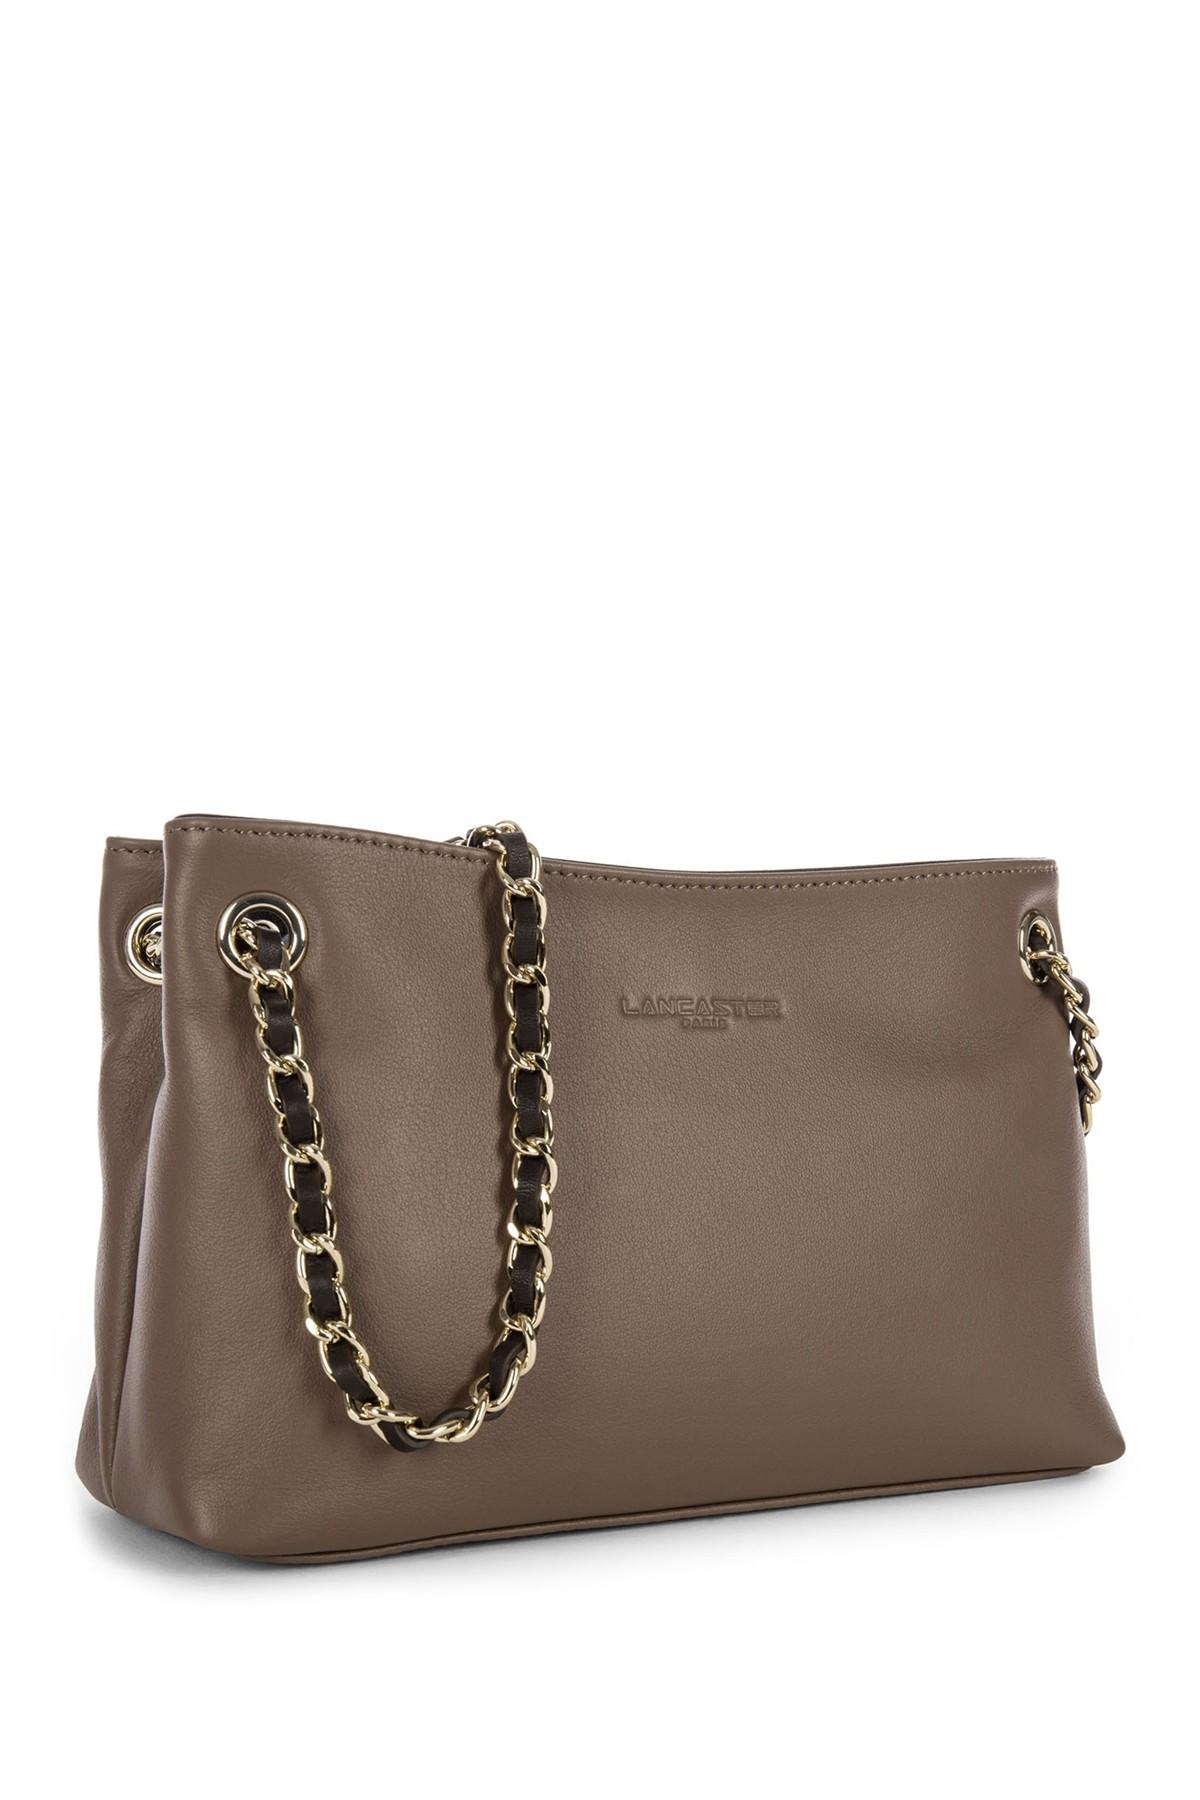 Lancaster Paris Estelly Small Leather Evening Bag in Brown - Lyst